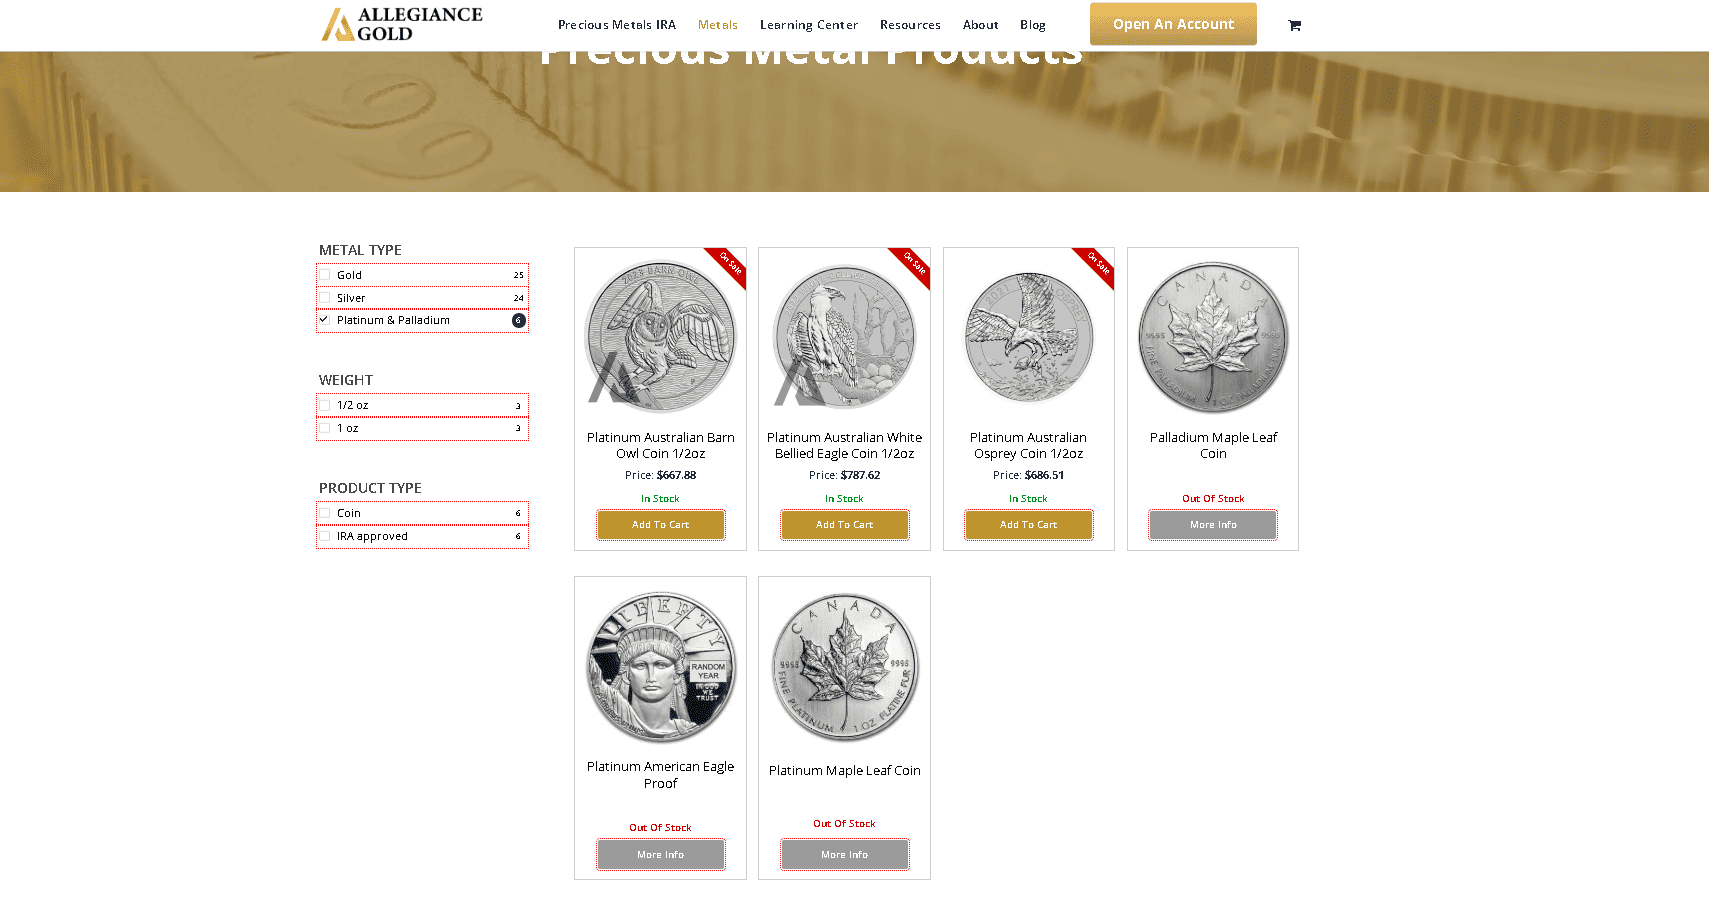 Allegiance Gold sell platinum and palladium coins and bars